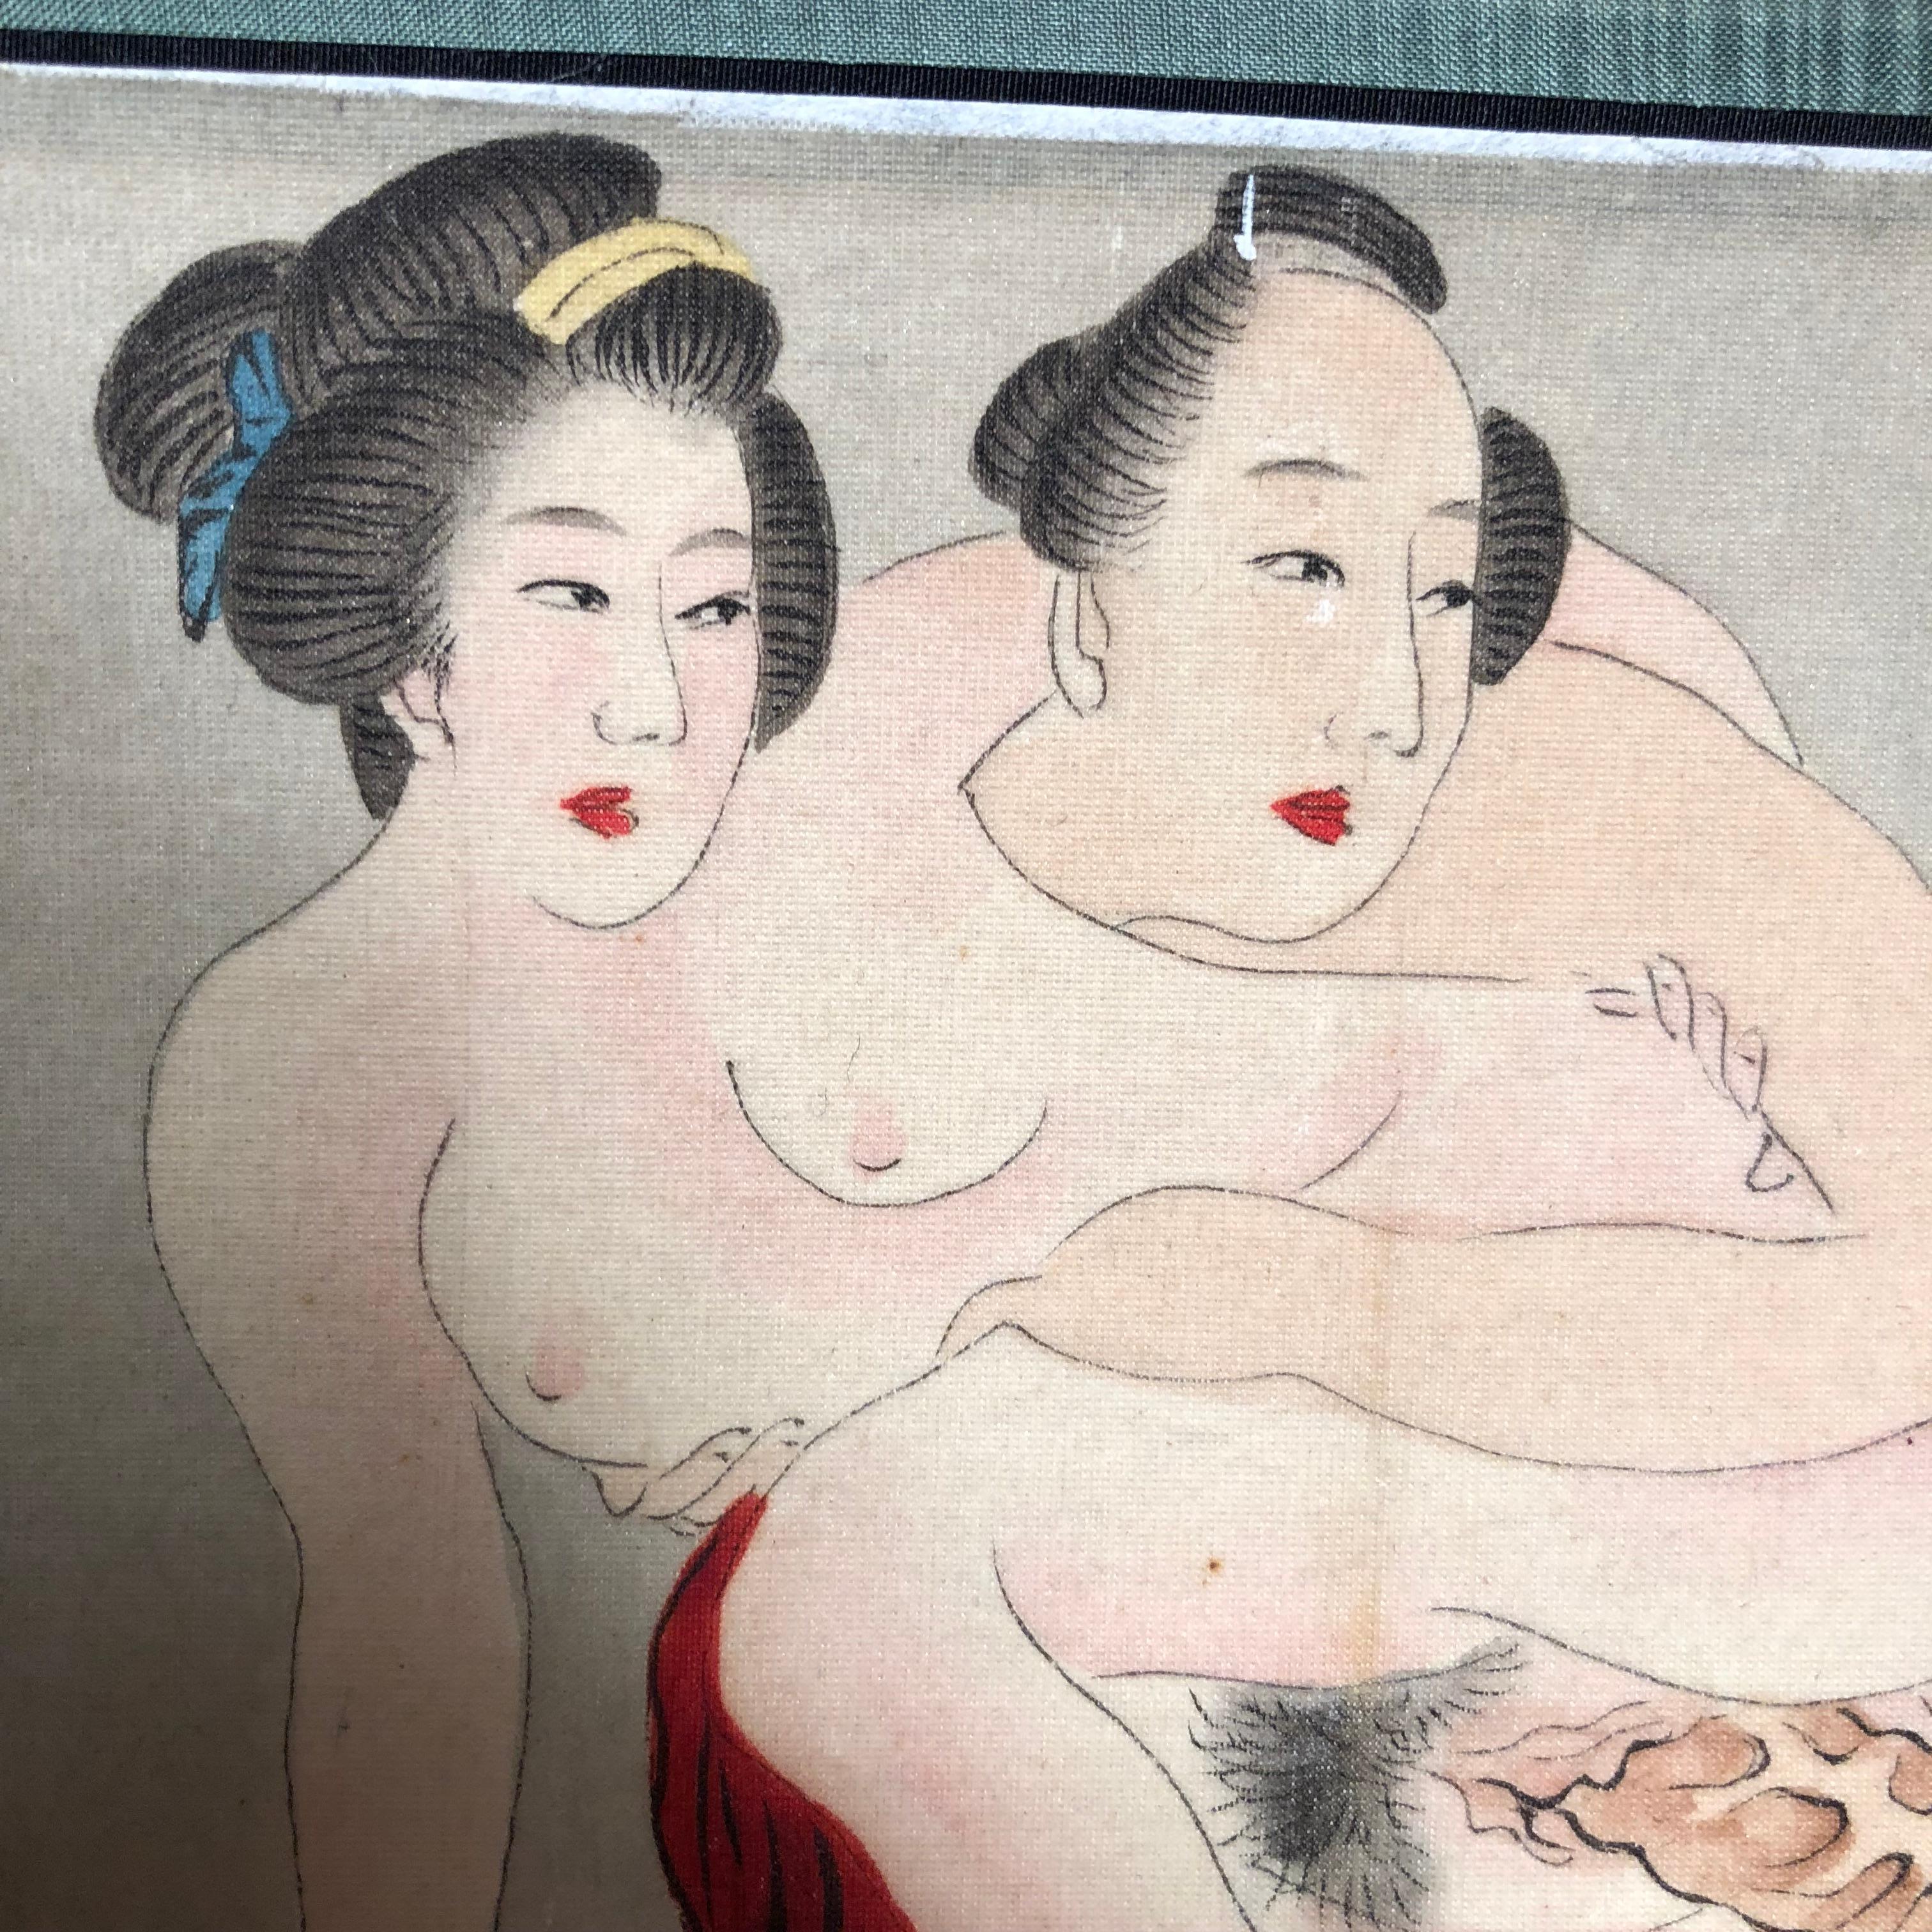 From our most recent Private Japanese collections acquisitions.

This very fine authentic Japanese hand-painted Shunga erotic scene on silk hand scroll is an elusive one of a kind. It possesses 75 inches, over six feet long, including eight